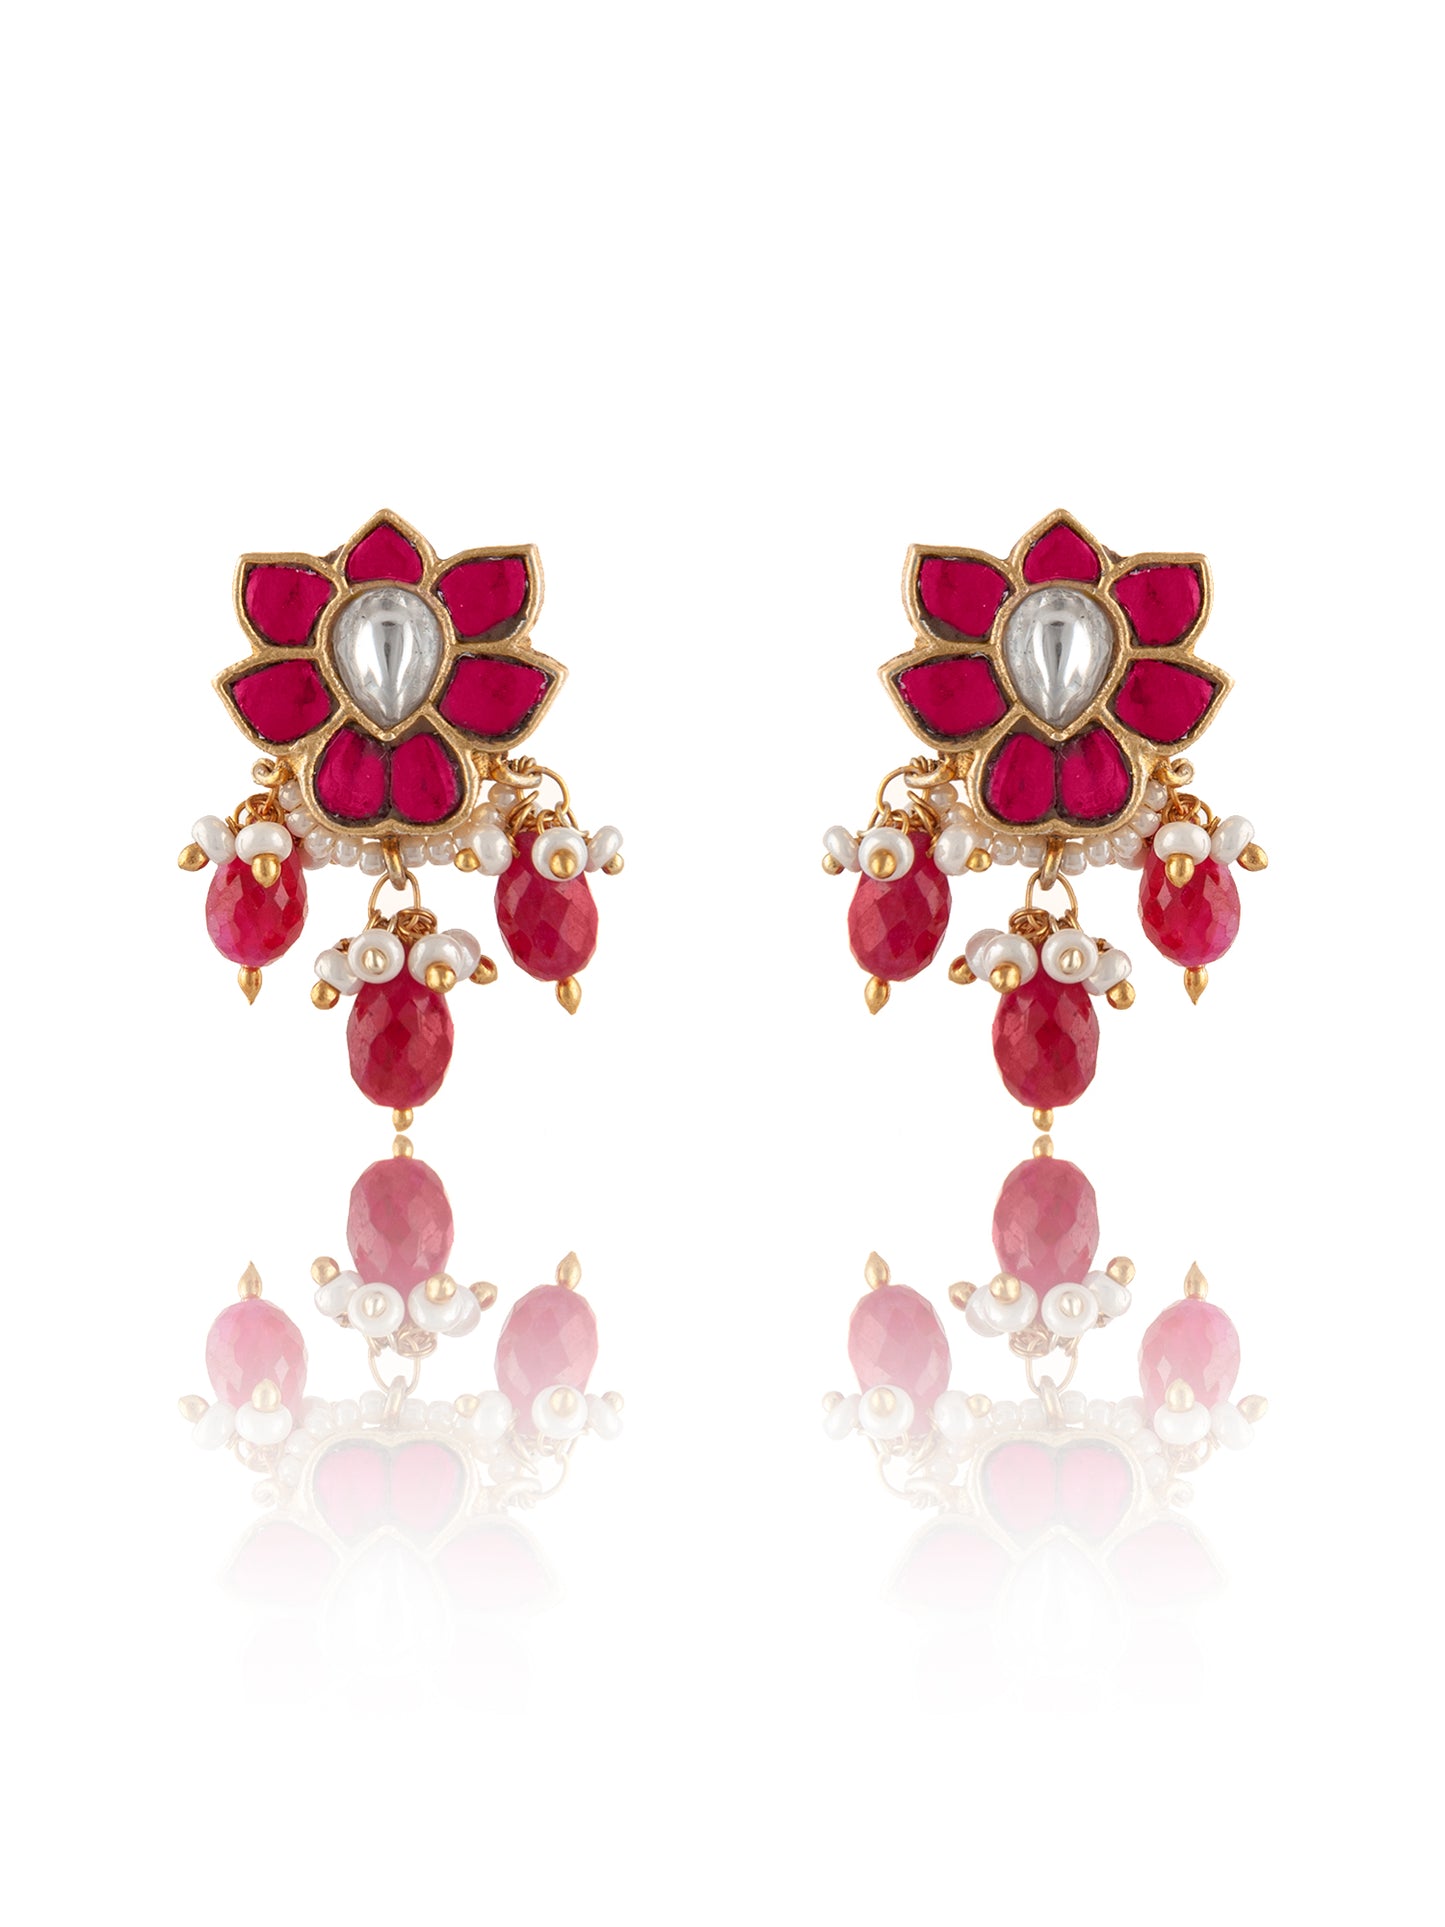 925 Sterling Silver Gold Plated Floral Kundan Earrings with Ruby Drops